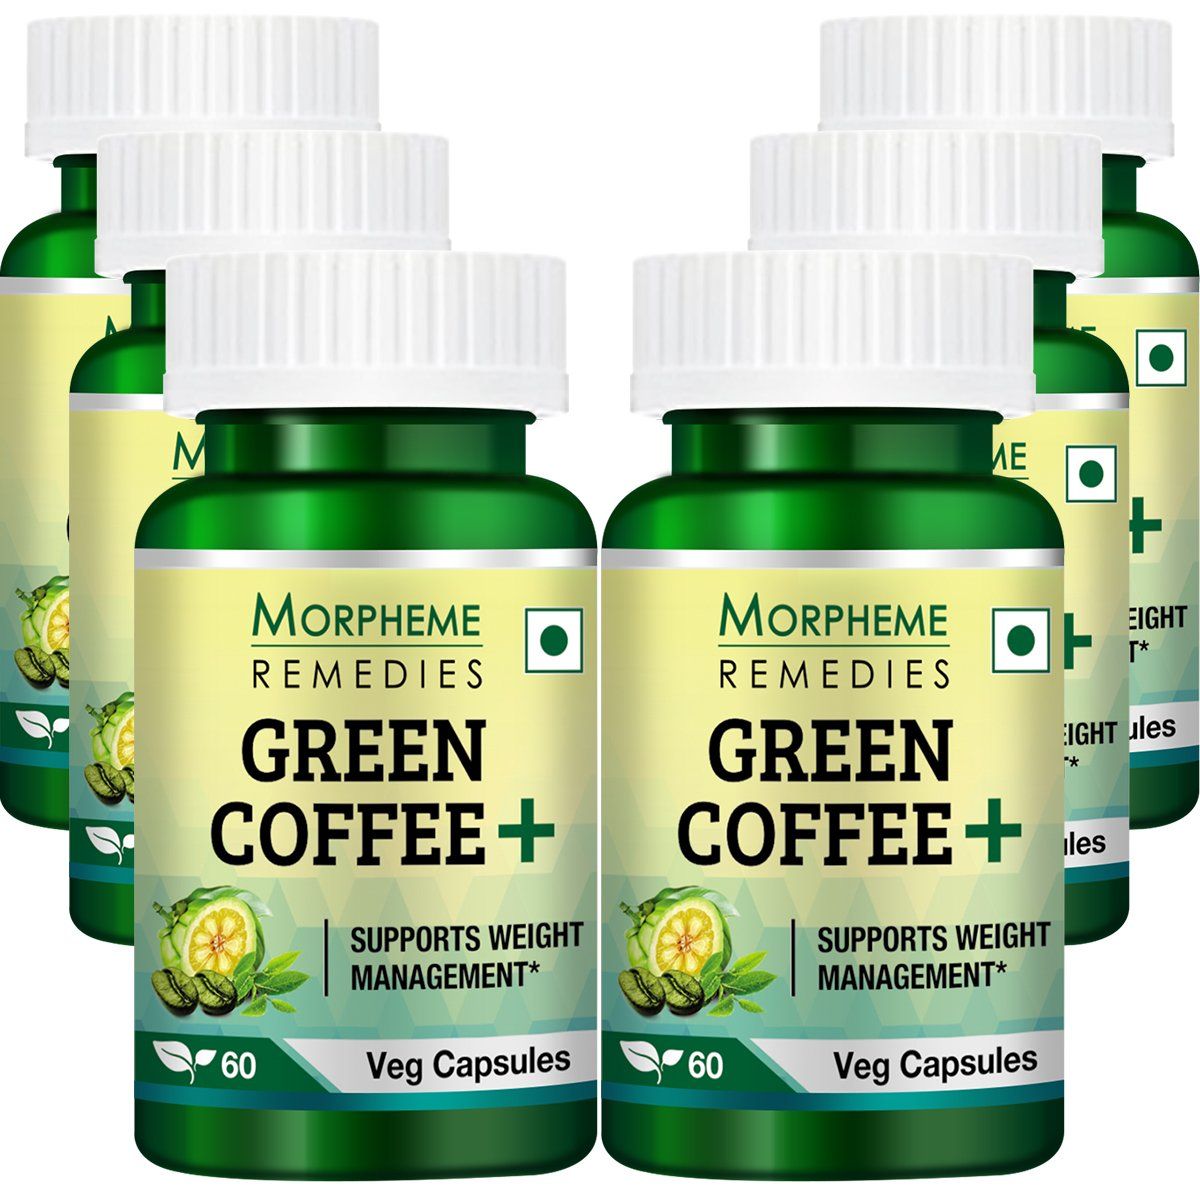 Morpheme Remedies Green Coffee+ Weight Management Capsule(Pack of 6)